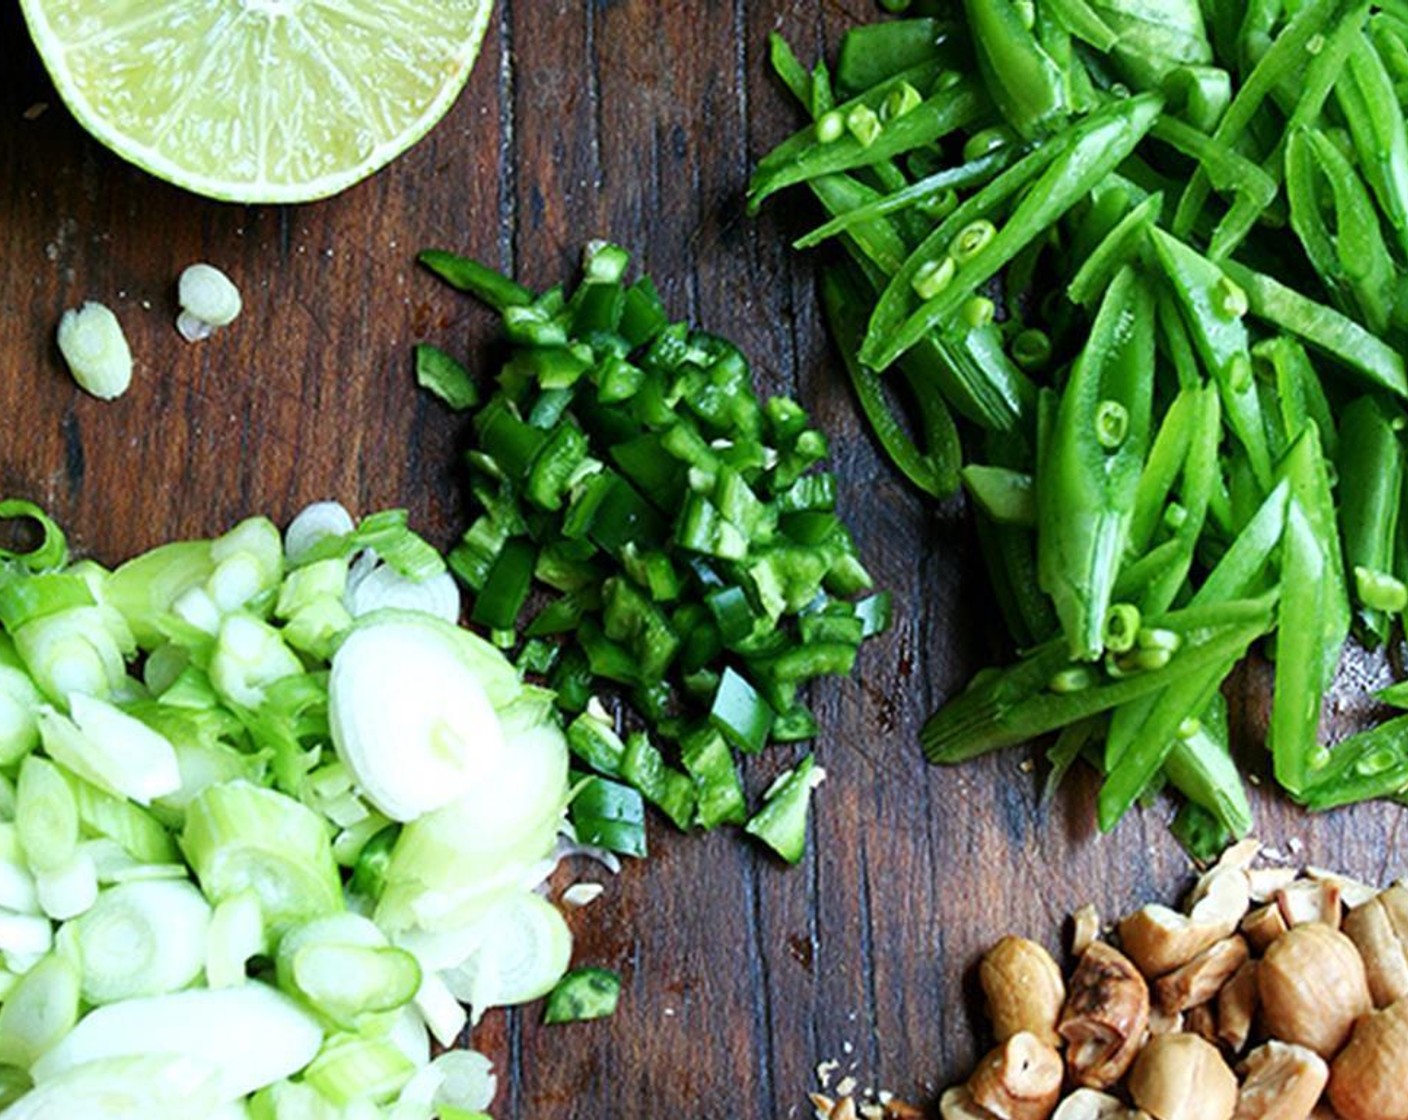 step 2 Prepare the remaining ingredients: Slice the Sugar Snap Peas (1 cup) on a bias and set aside. Roughly chop the Cashew Nuts (1/2 cup). Slice the Scallion (1 bunch) thinly. Remove the seeds from the Serrano Chilis (2), then finely dice.